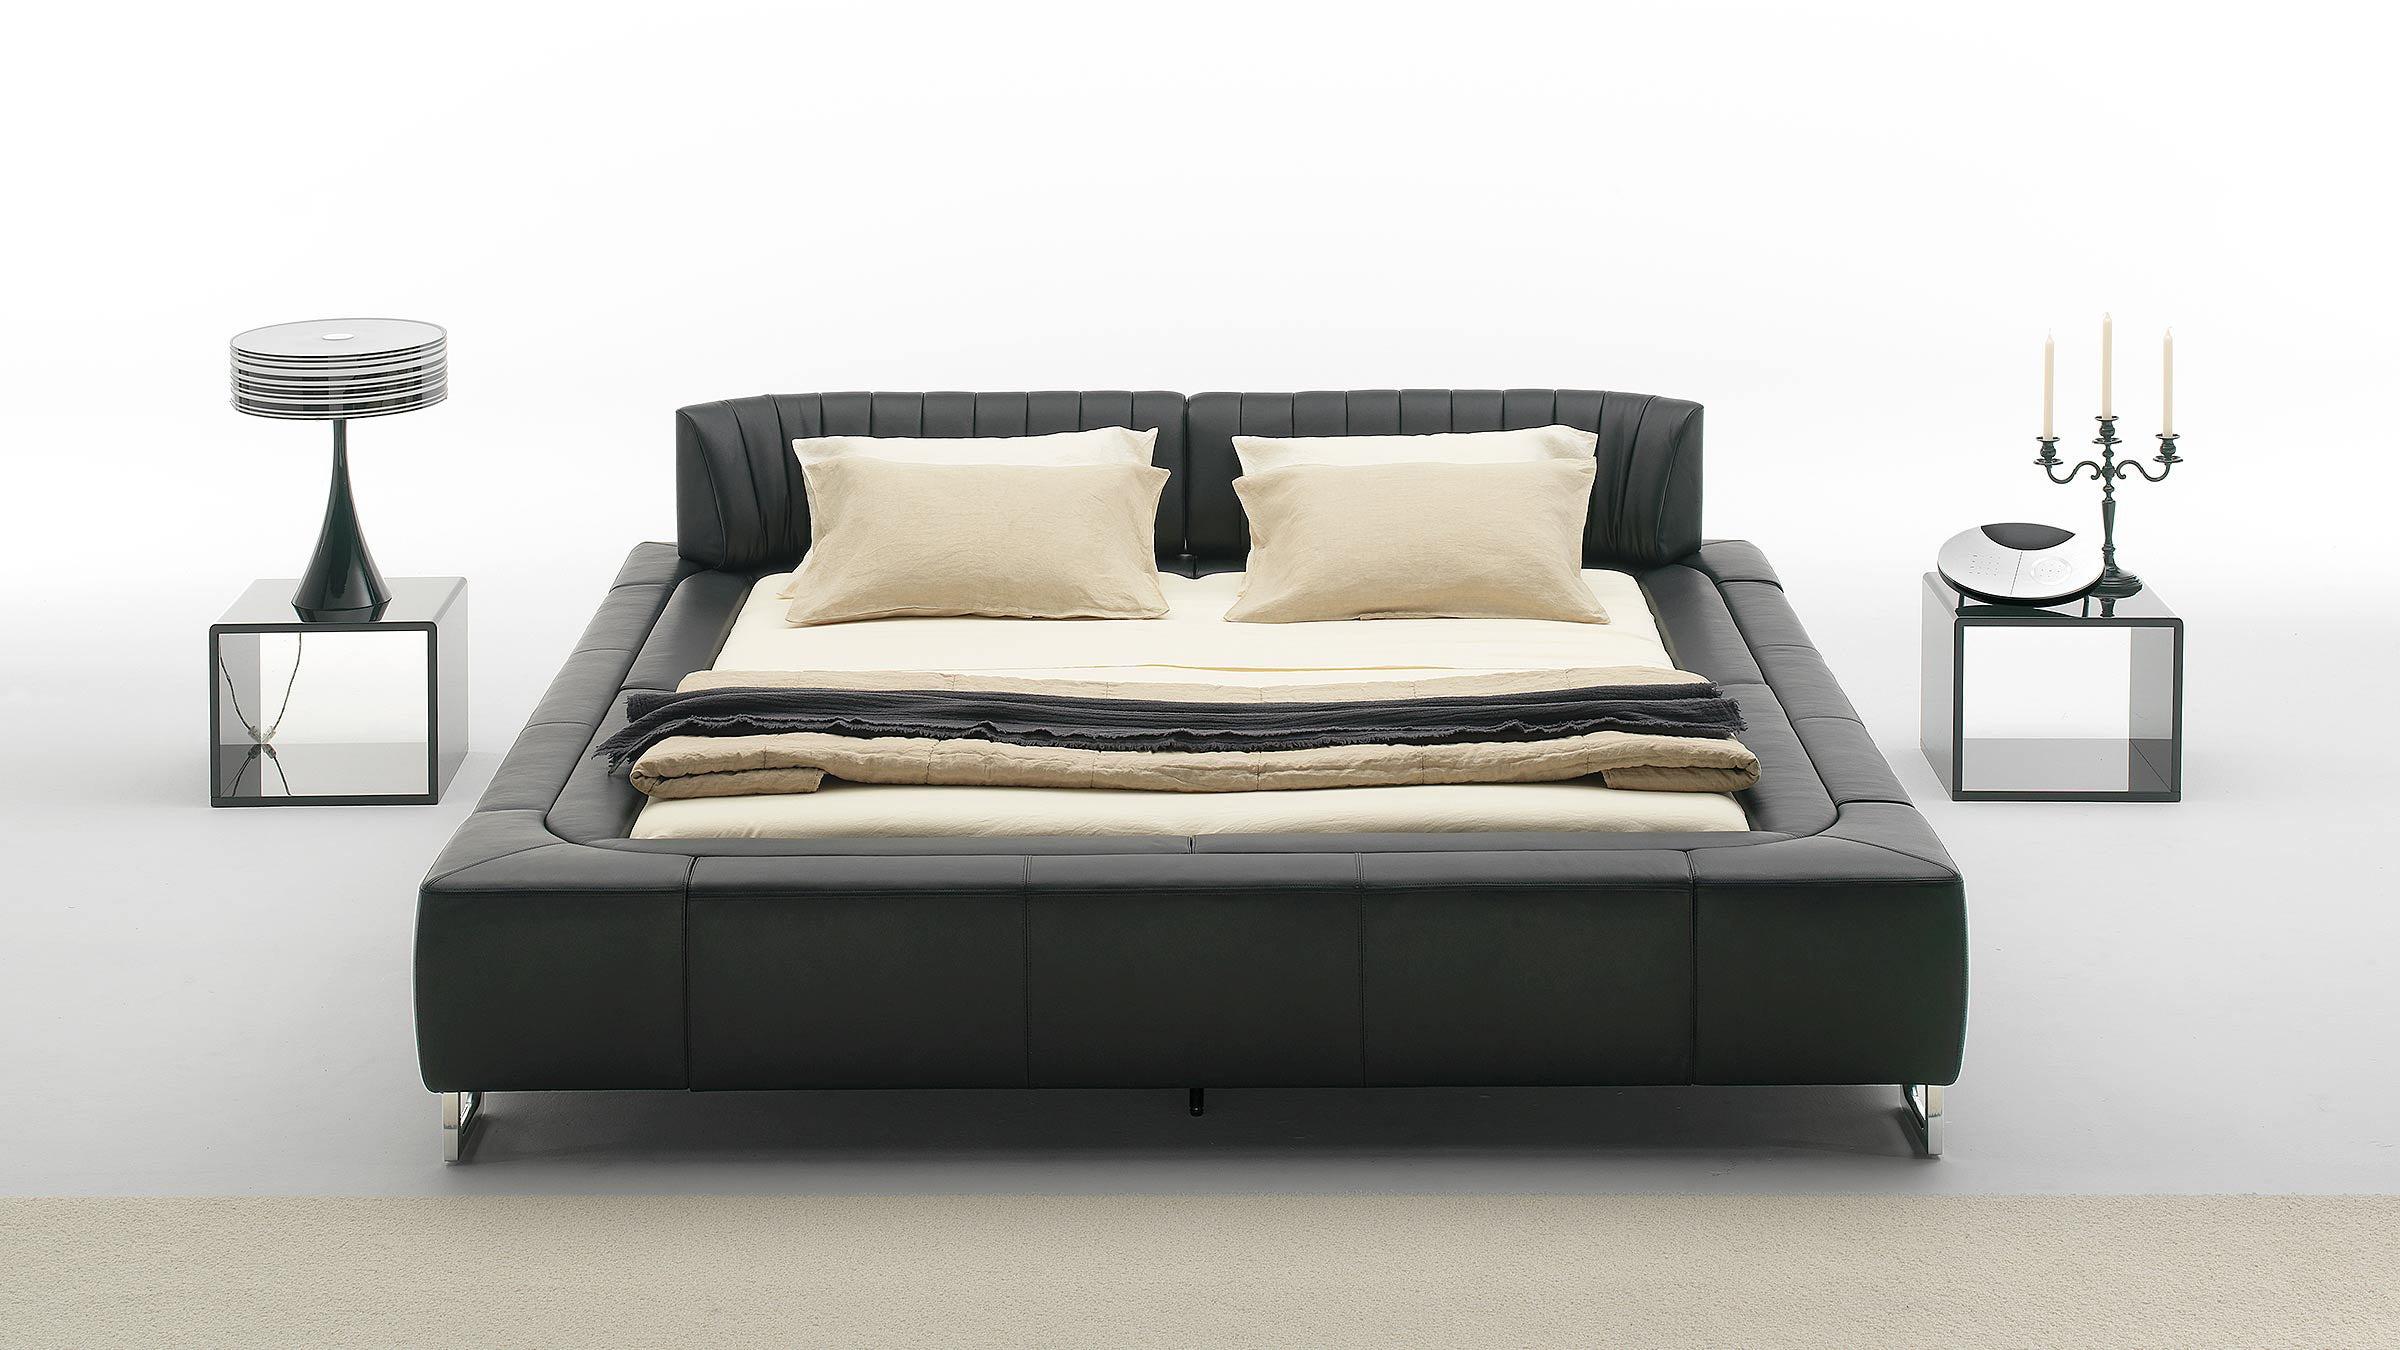 De Sede DS-1165 Queen Size Bed in Leather by Hugo de Ruiter In New Condition For Sale In Brooklyn, NY